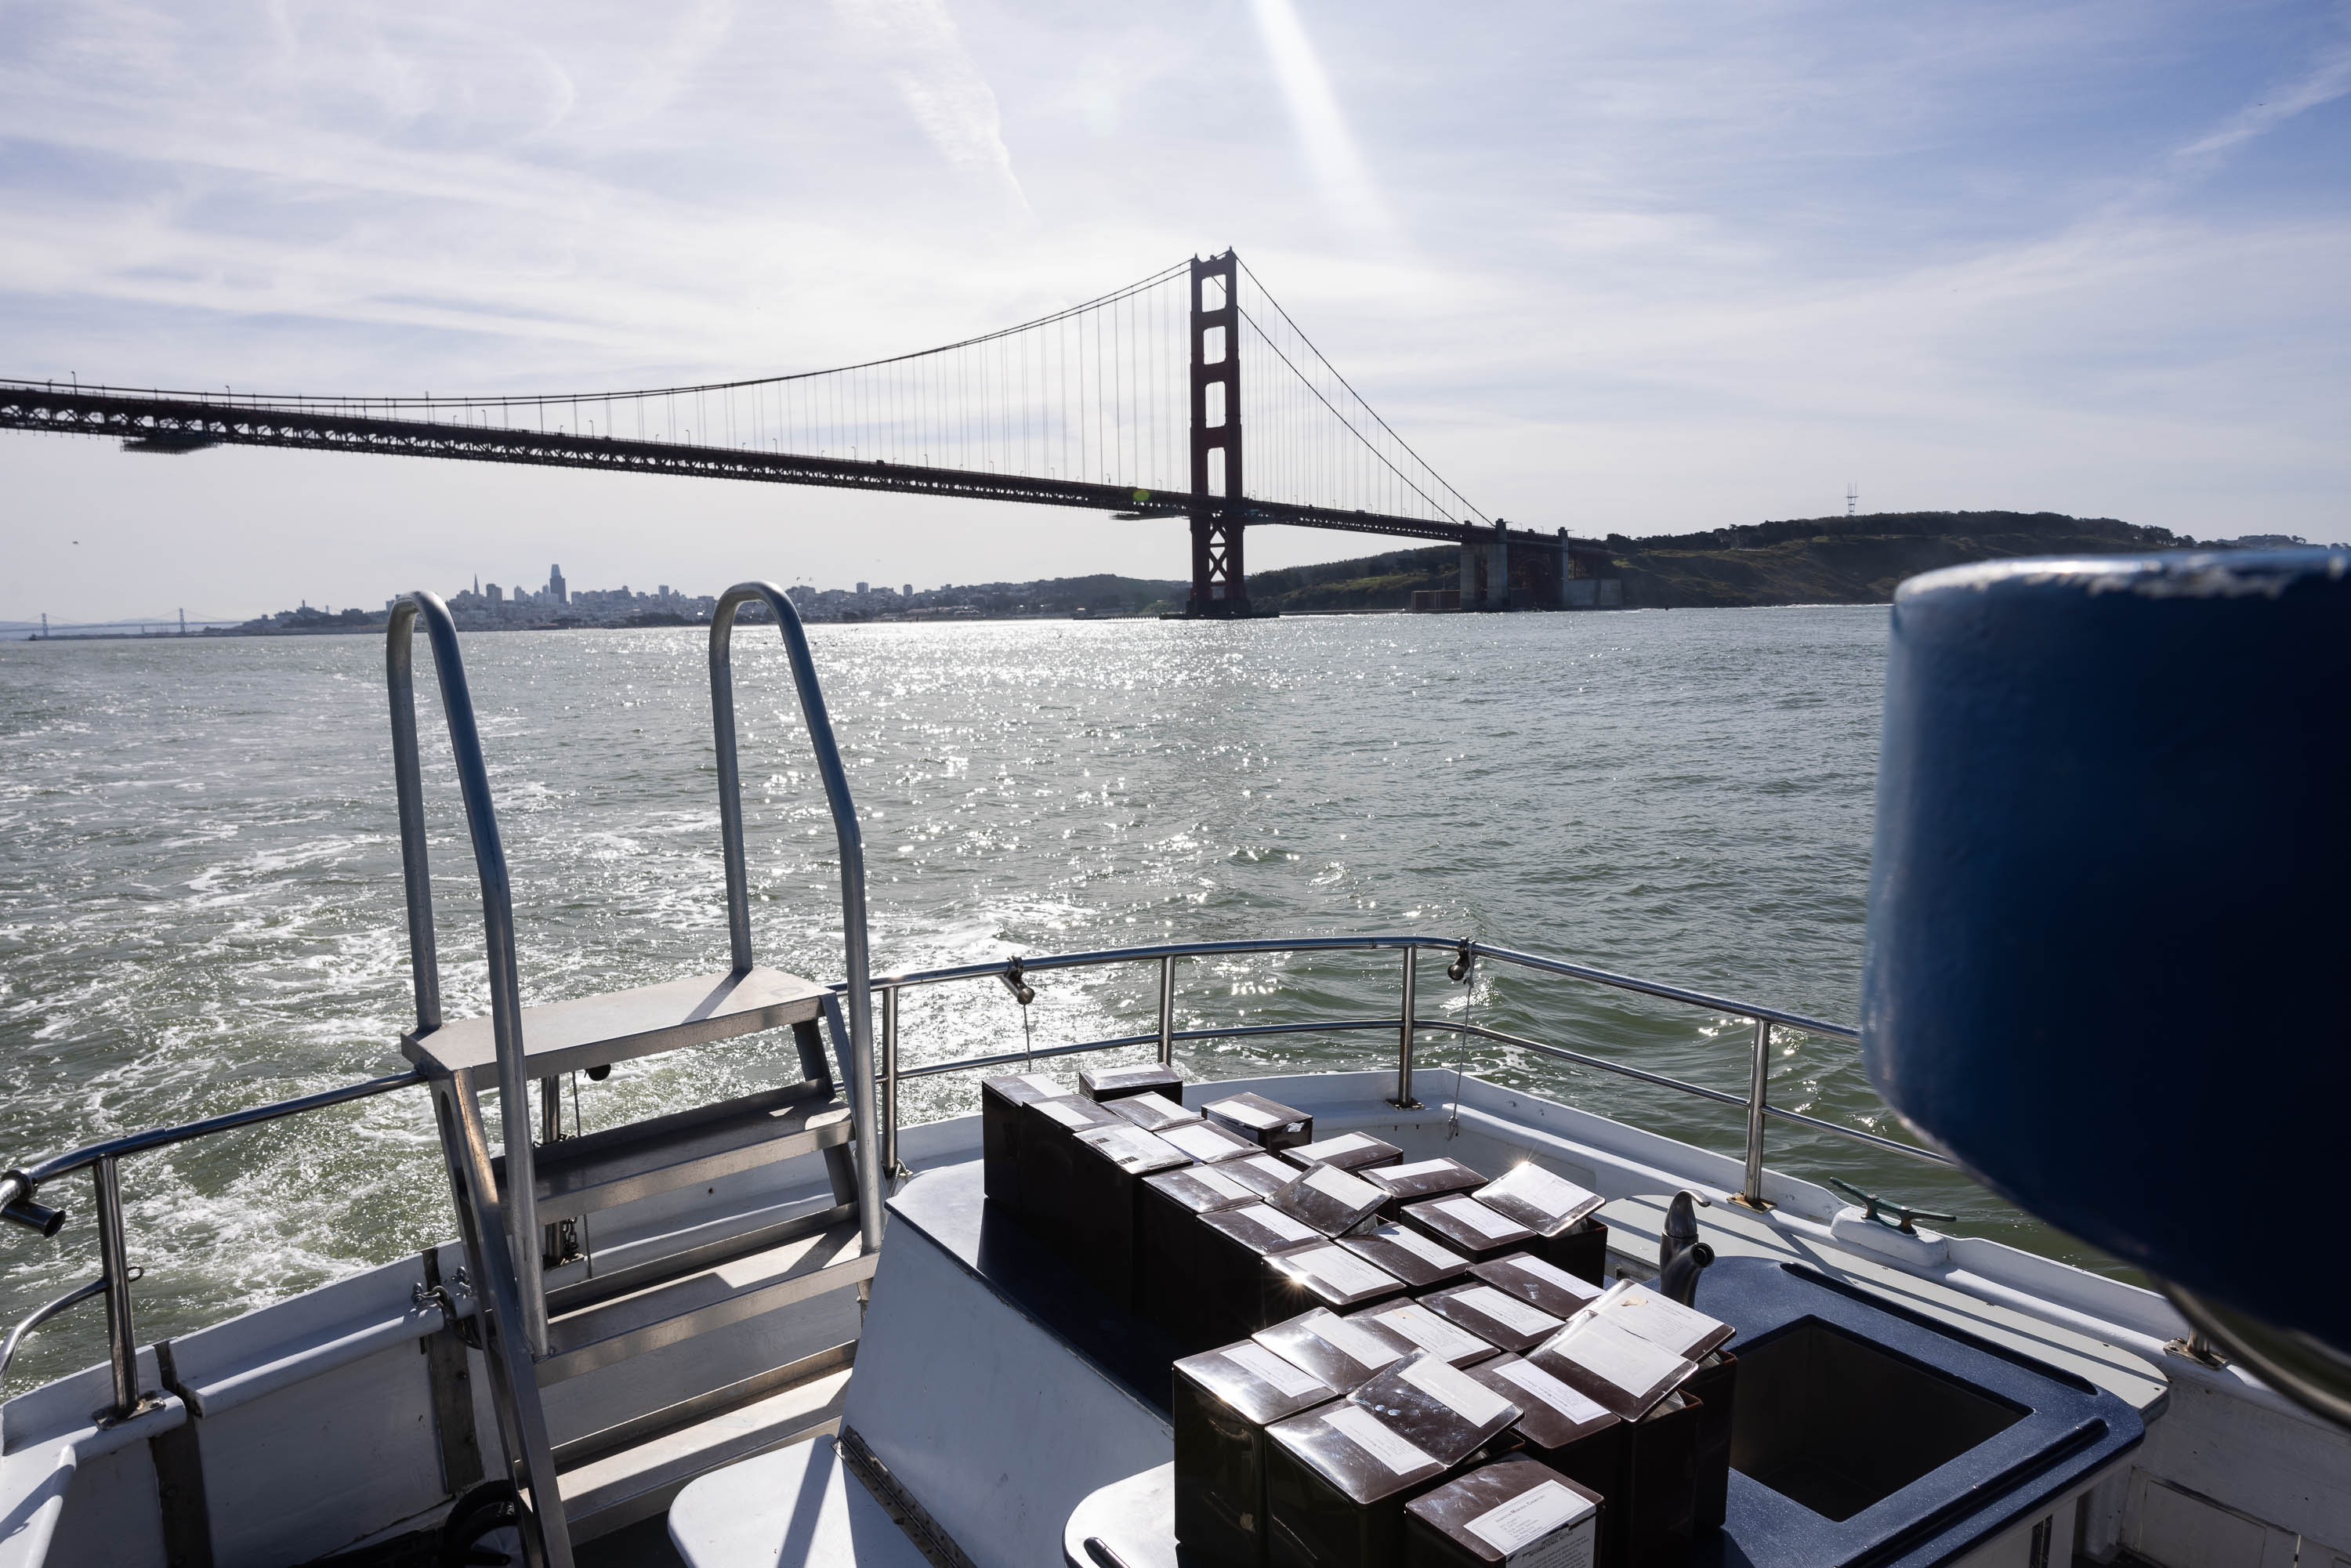 A boat's rear deck with empty seats overlooking the Golden Gate Bridge and San Francisco skyline.